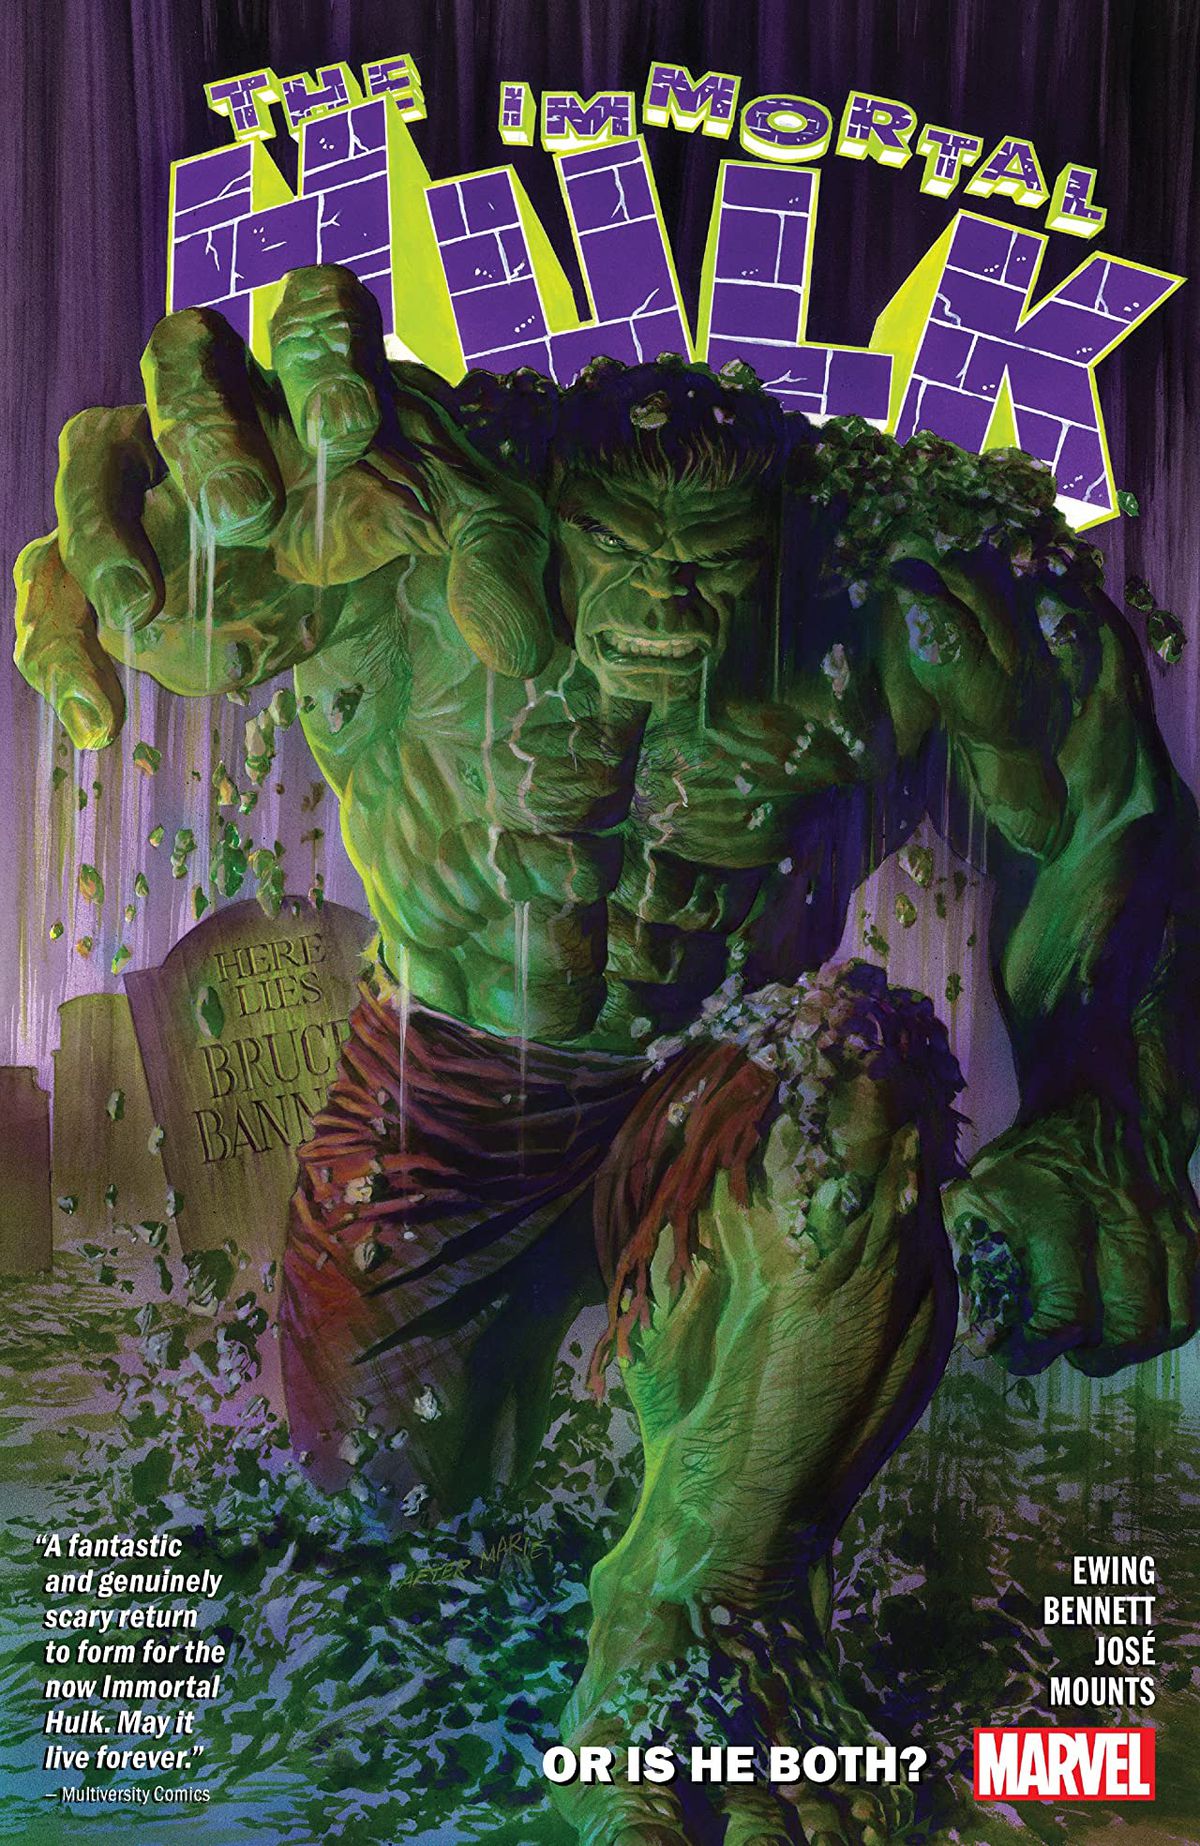 The Hulk leaps from the grave of Bruce Banner on the cover of Immortal Hulk Vol. 1. 